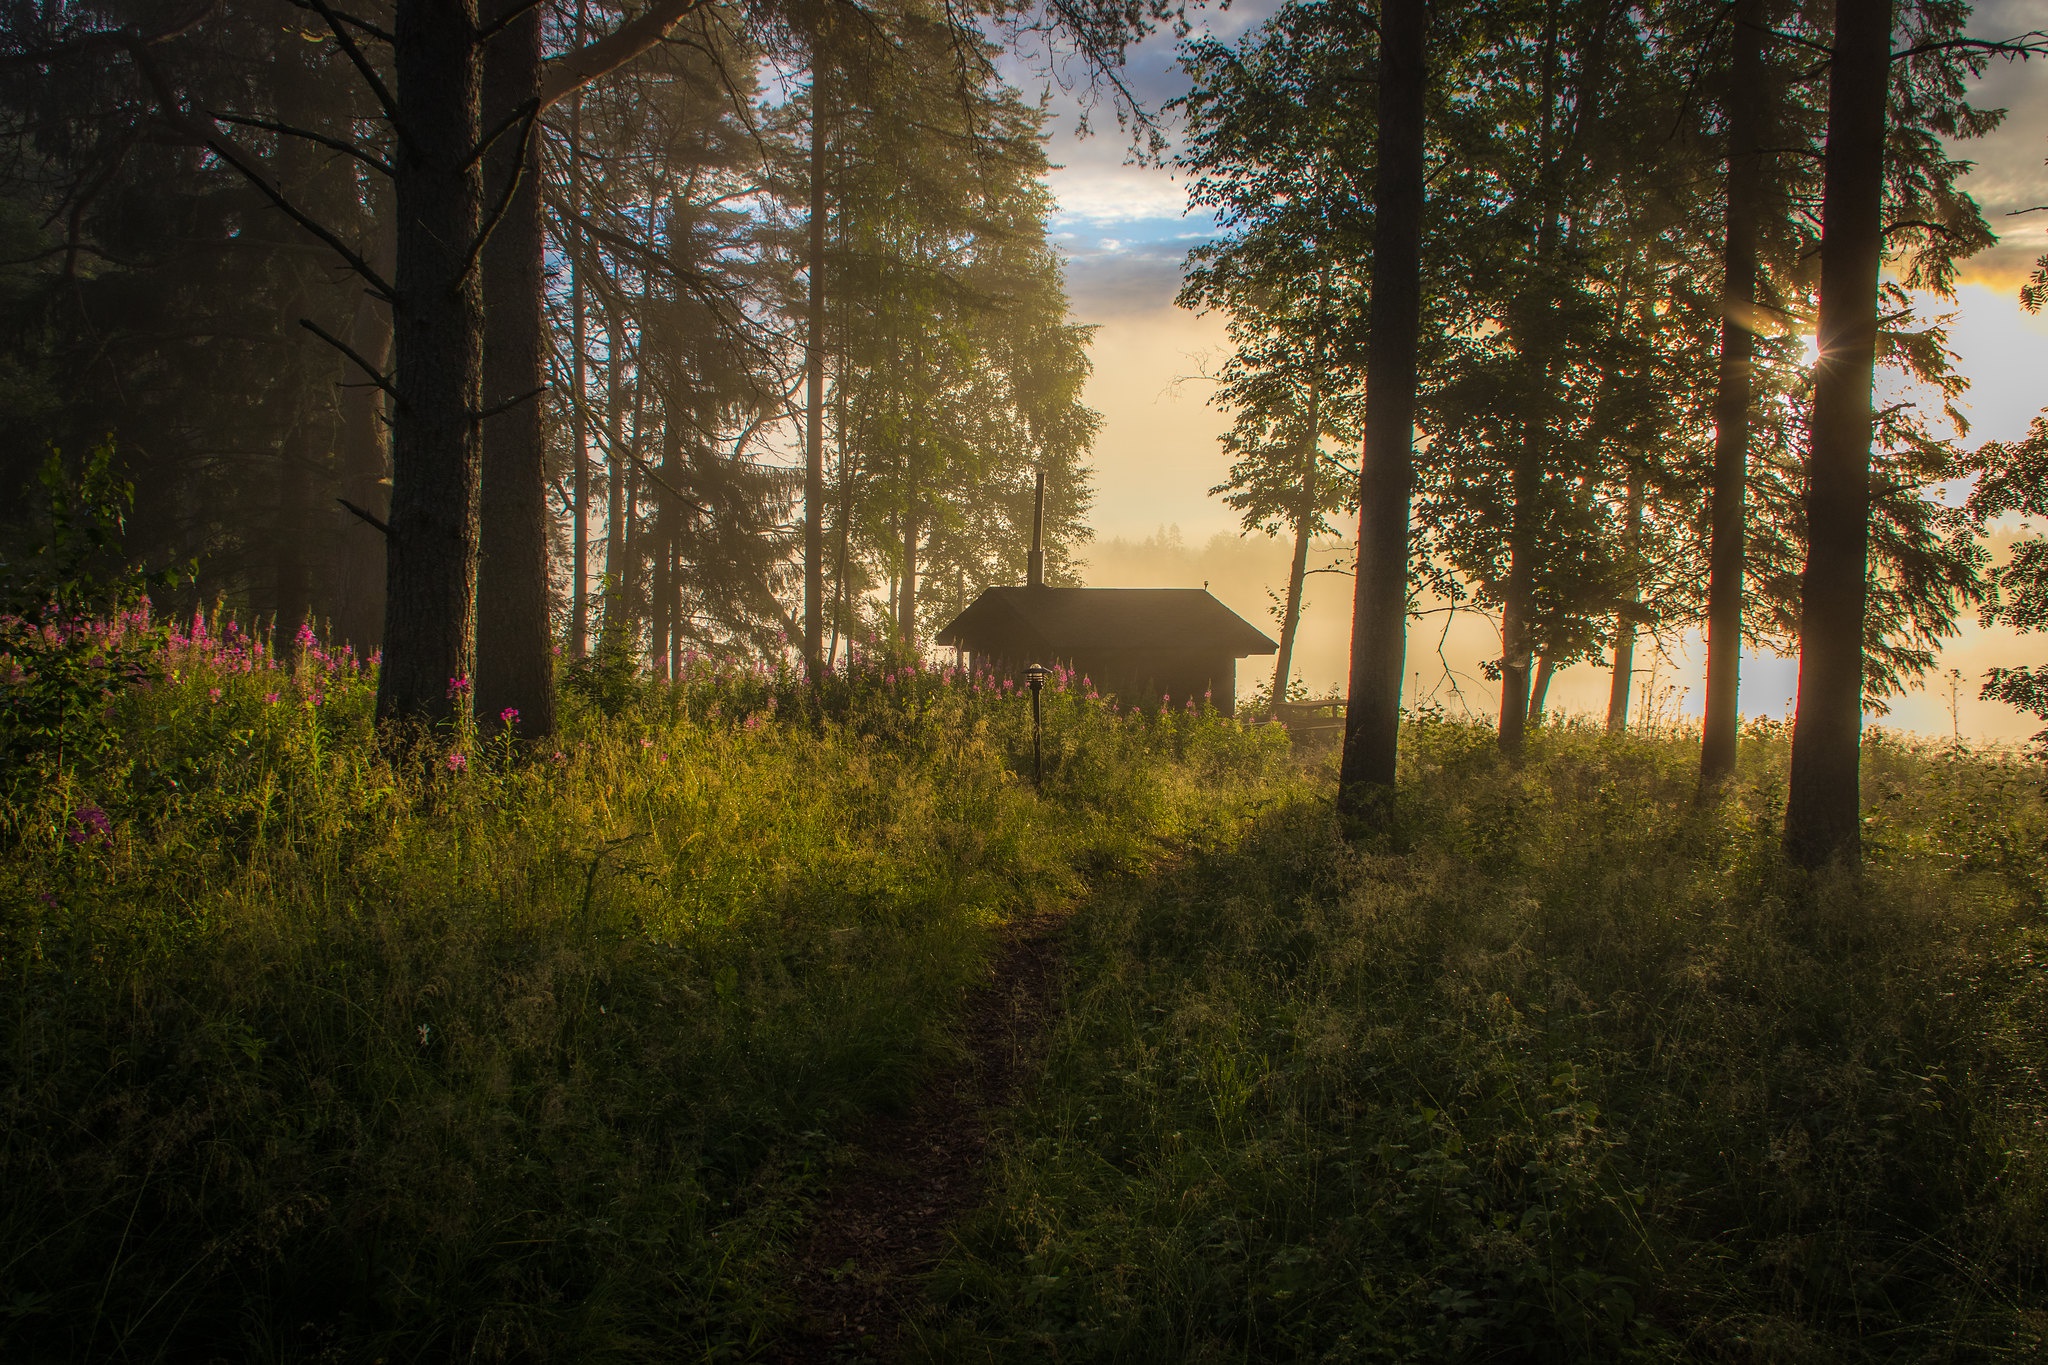 man made, cabin, flower, fog, forest, path, pine tree, thicket